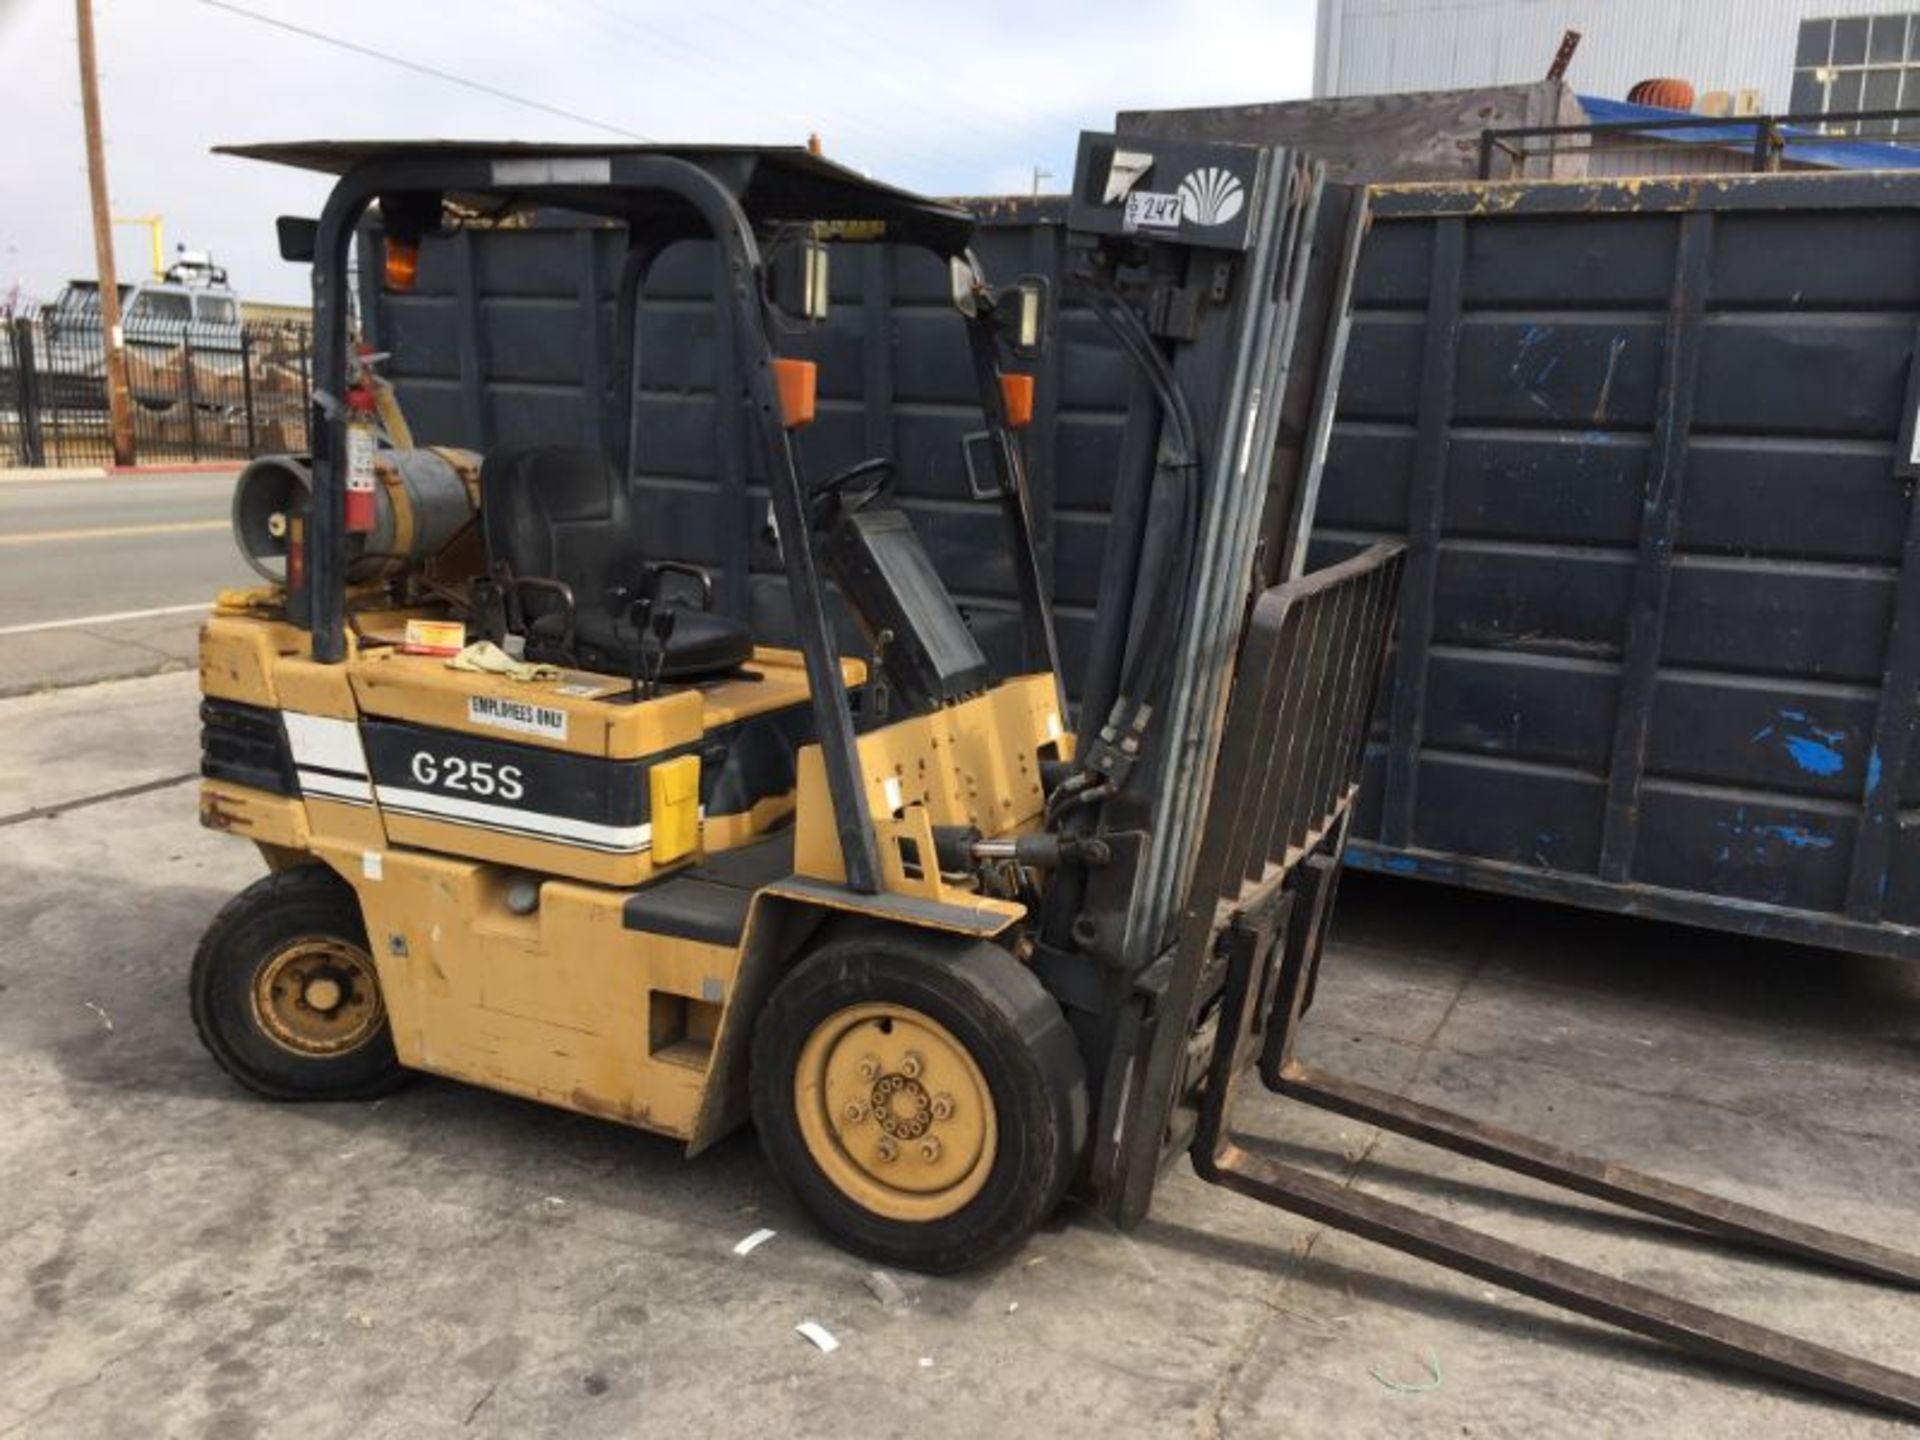 5000 lb Daewoo G25S LPG Forklift, 3619 Hrs. *Late Delivery* - Image 2 of 4